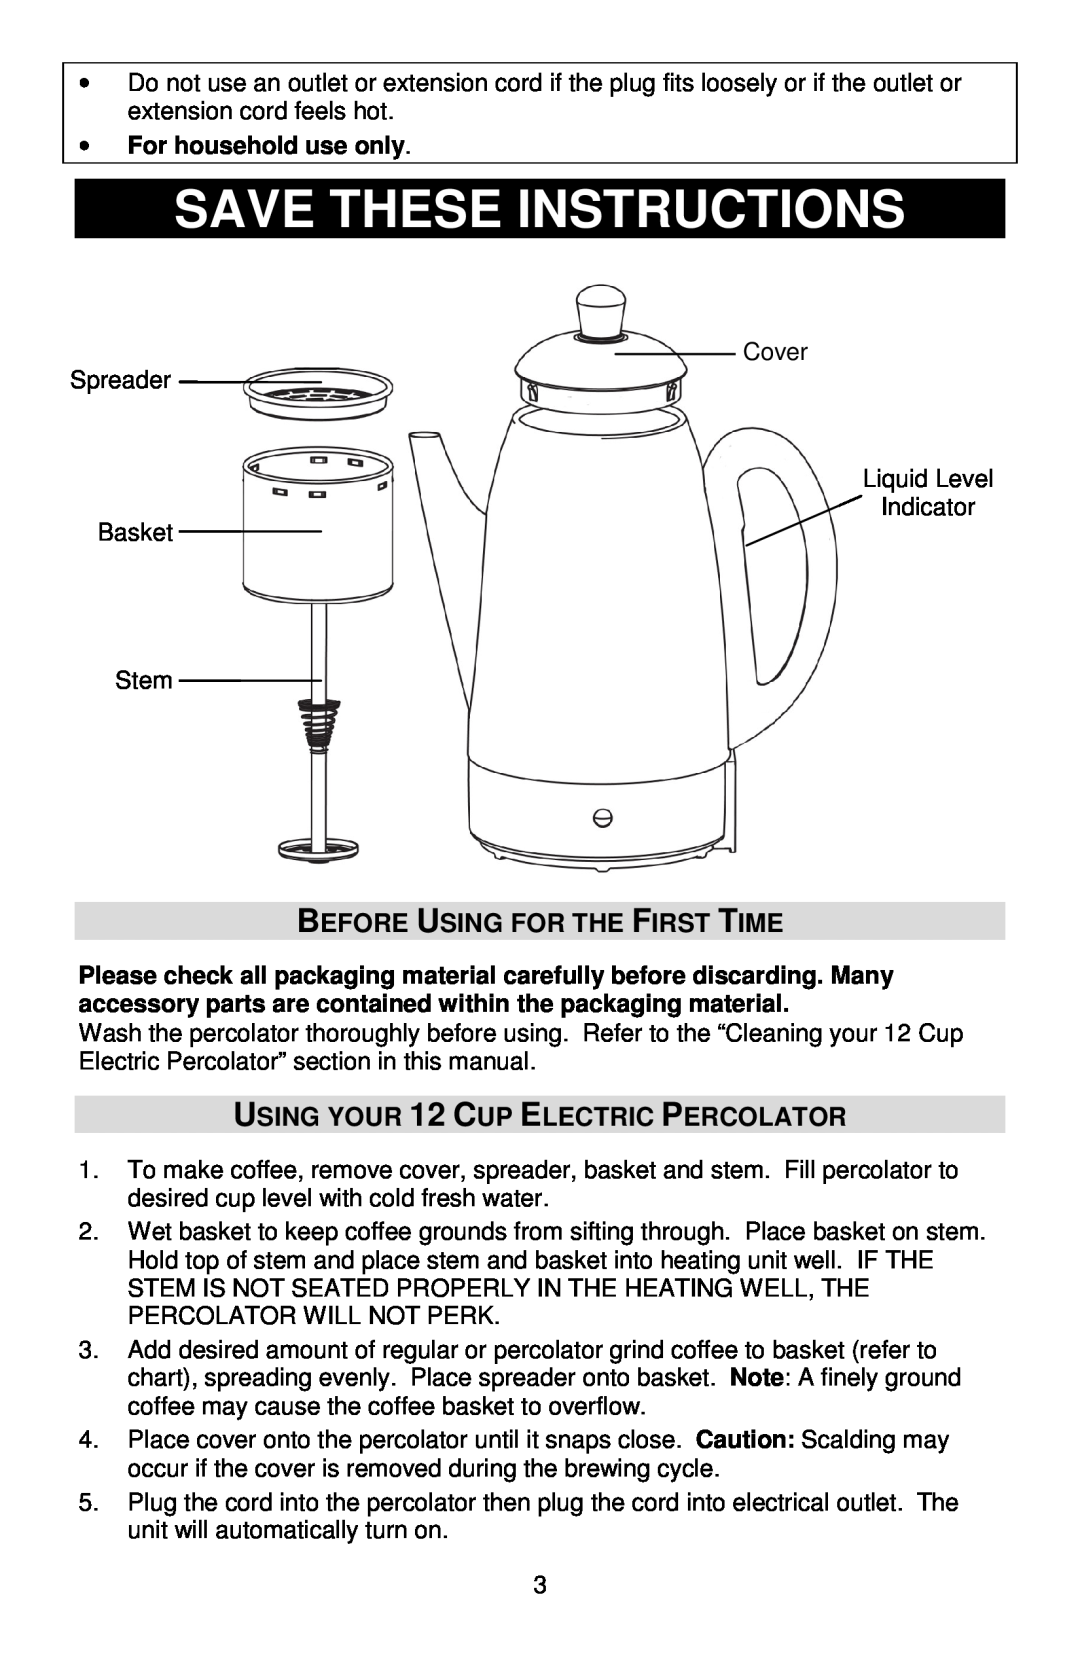 West Bend L5806, 54159 Save These Instructions, Before Using For The First Time, USING YOUR 12 CUP ELECTRIC PERCOLATOR 